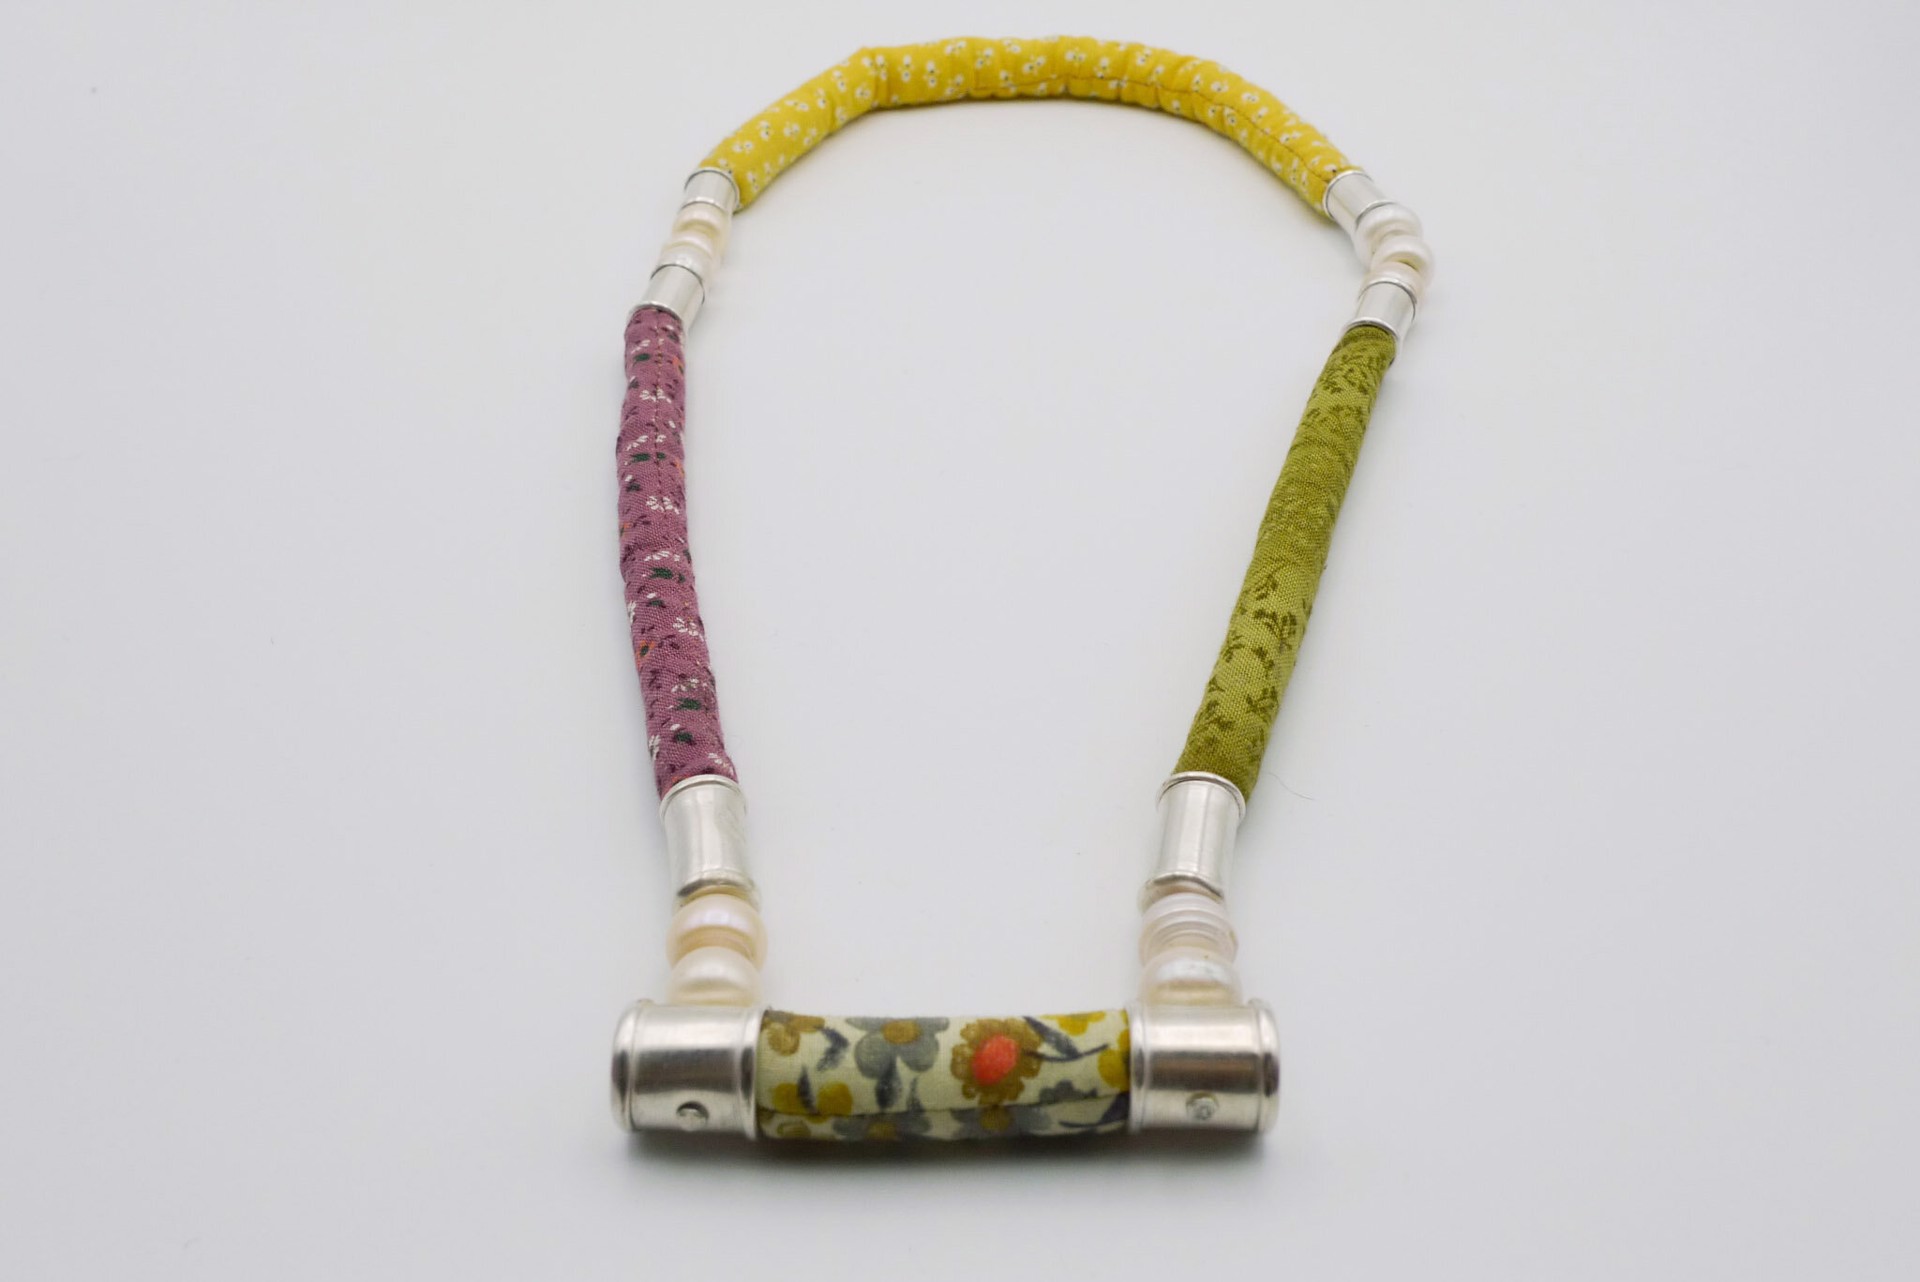 Tubes and Pearls Necklace by Alison L. Bailey